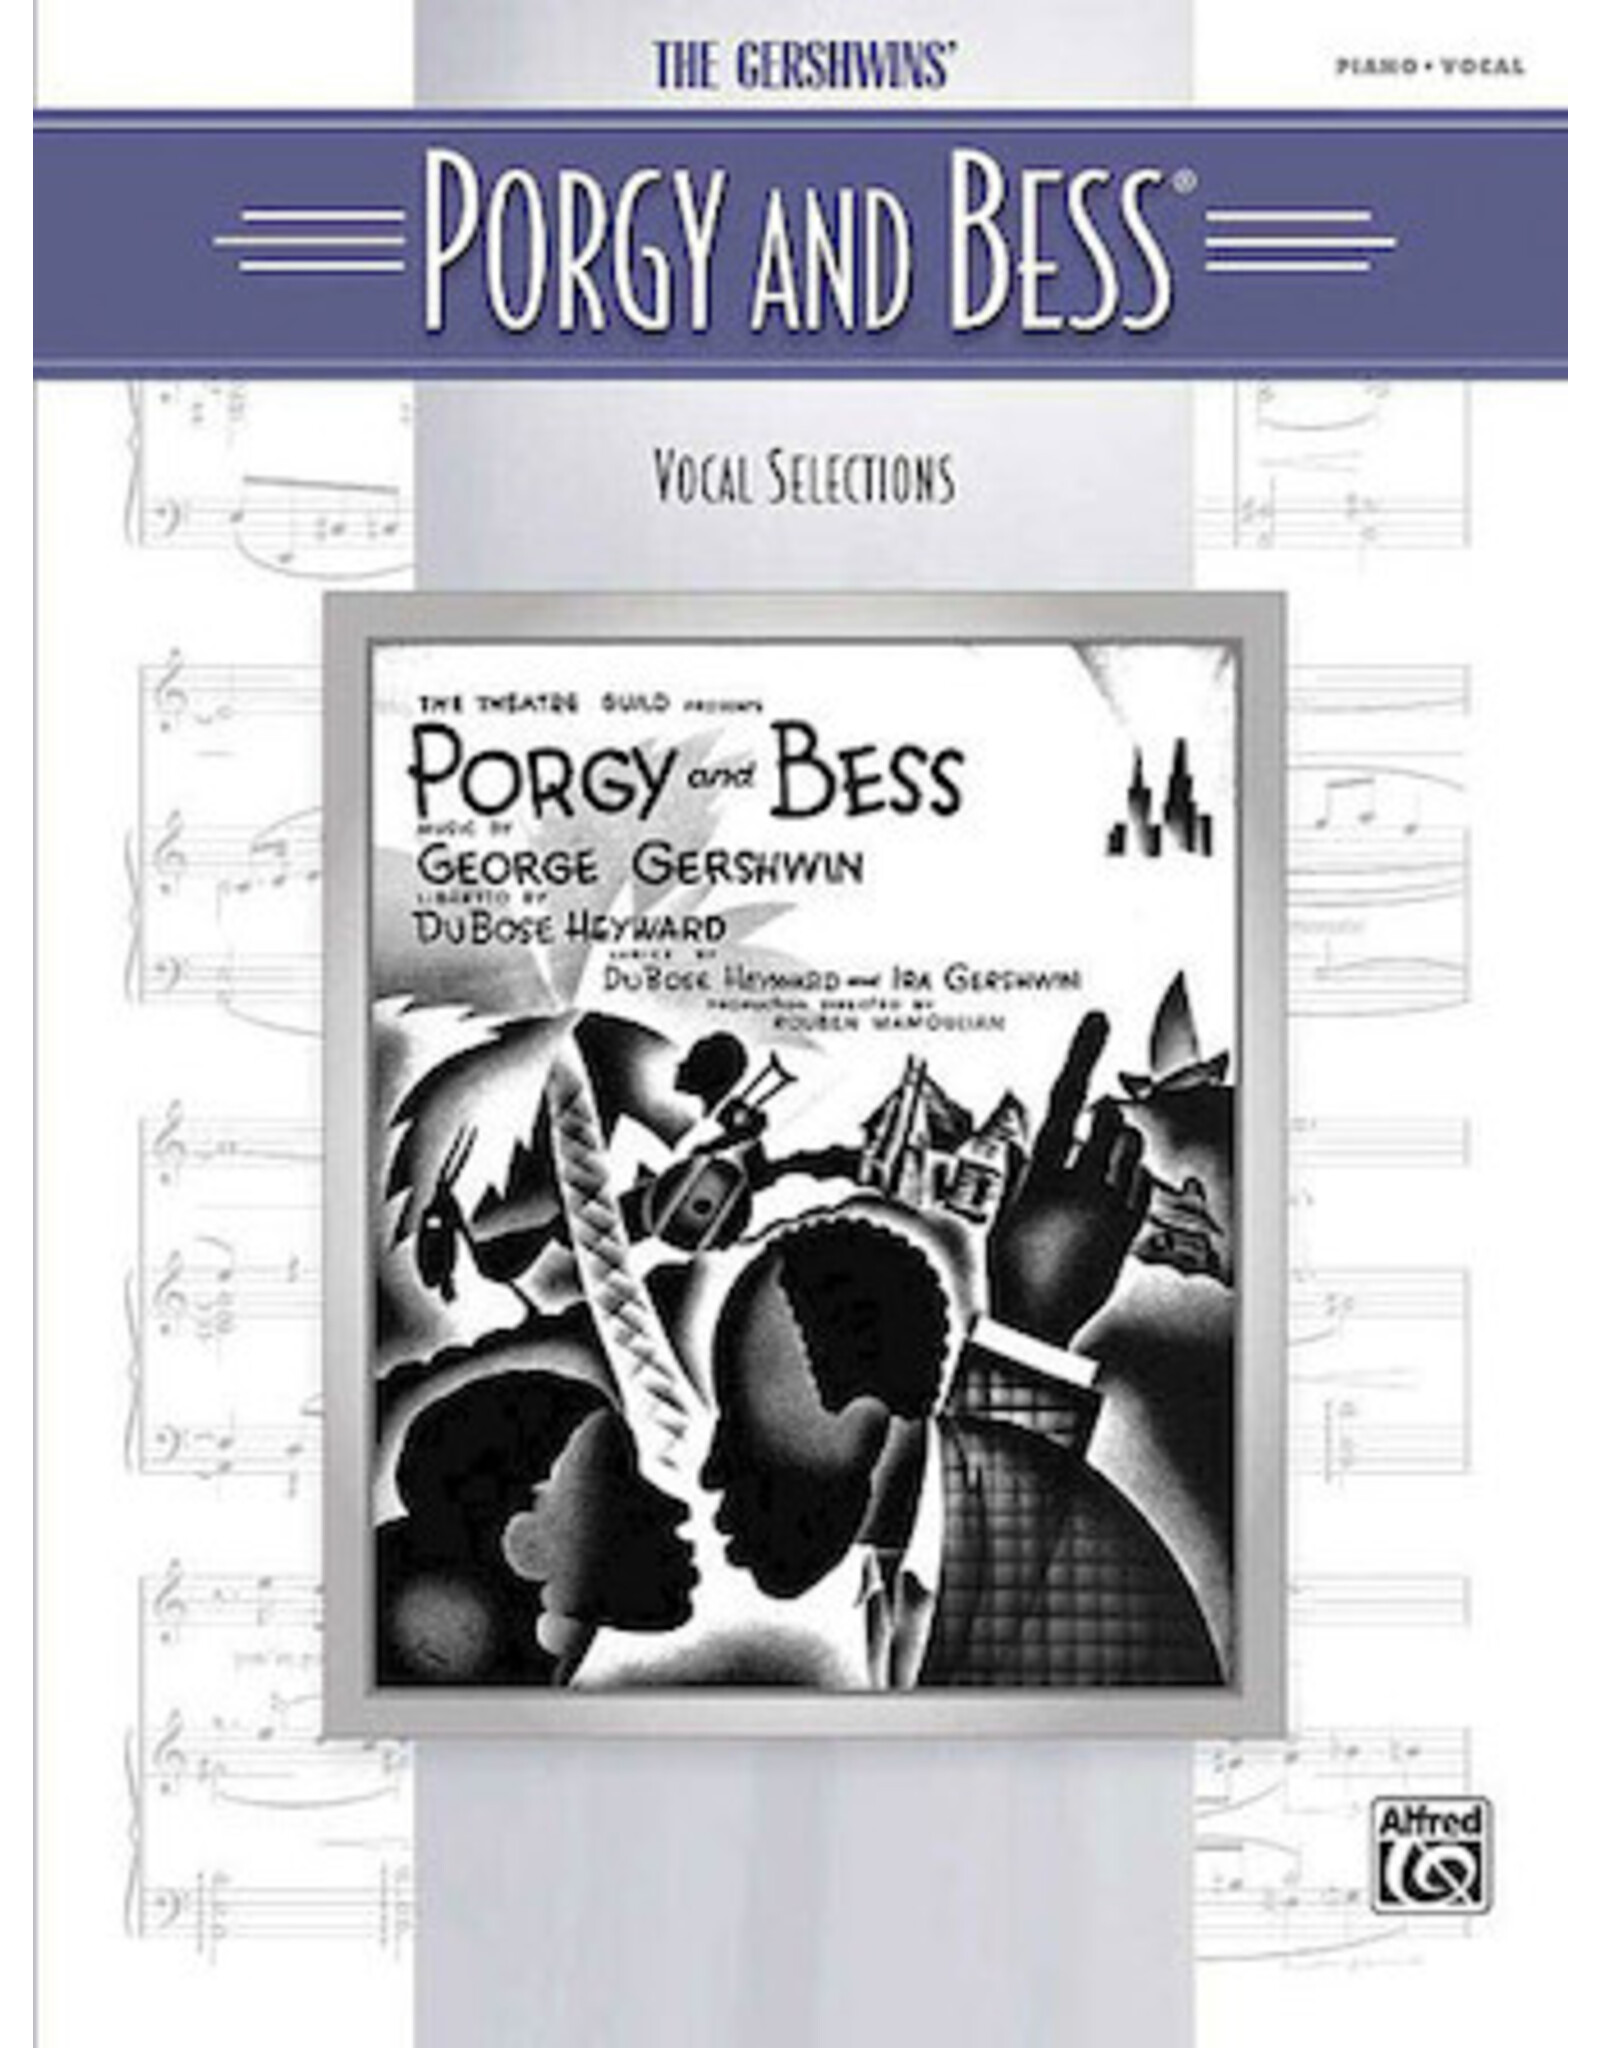 Hal Leonard Porgy and Bess Vocal Selections Piano/Vocal/Guitar Artist Songbook